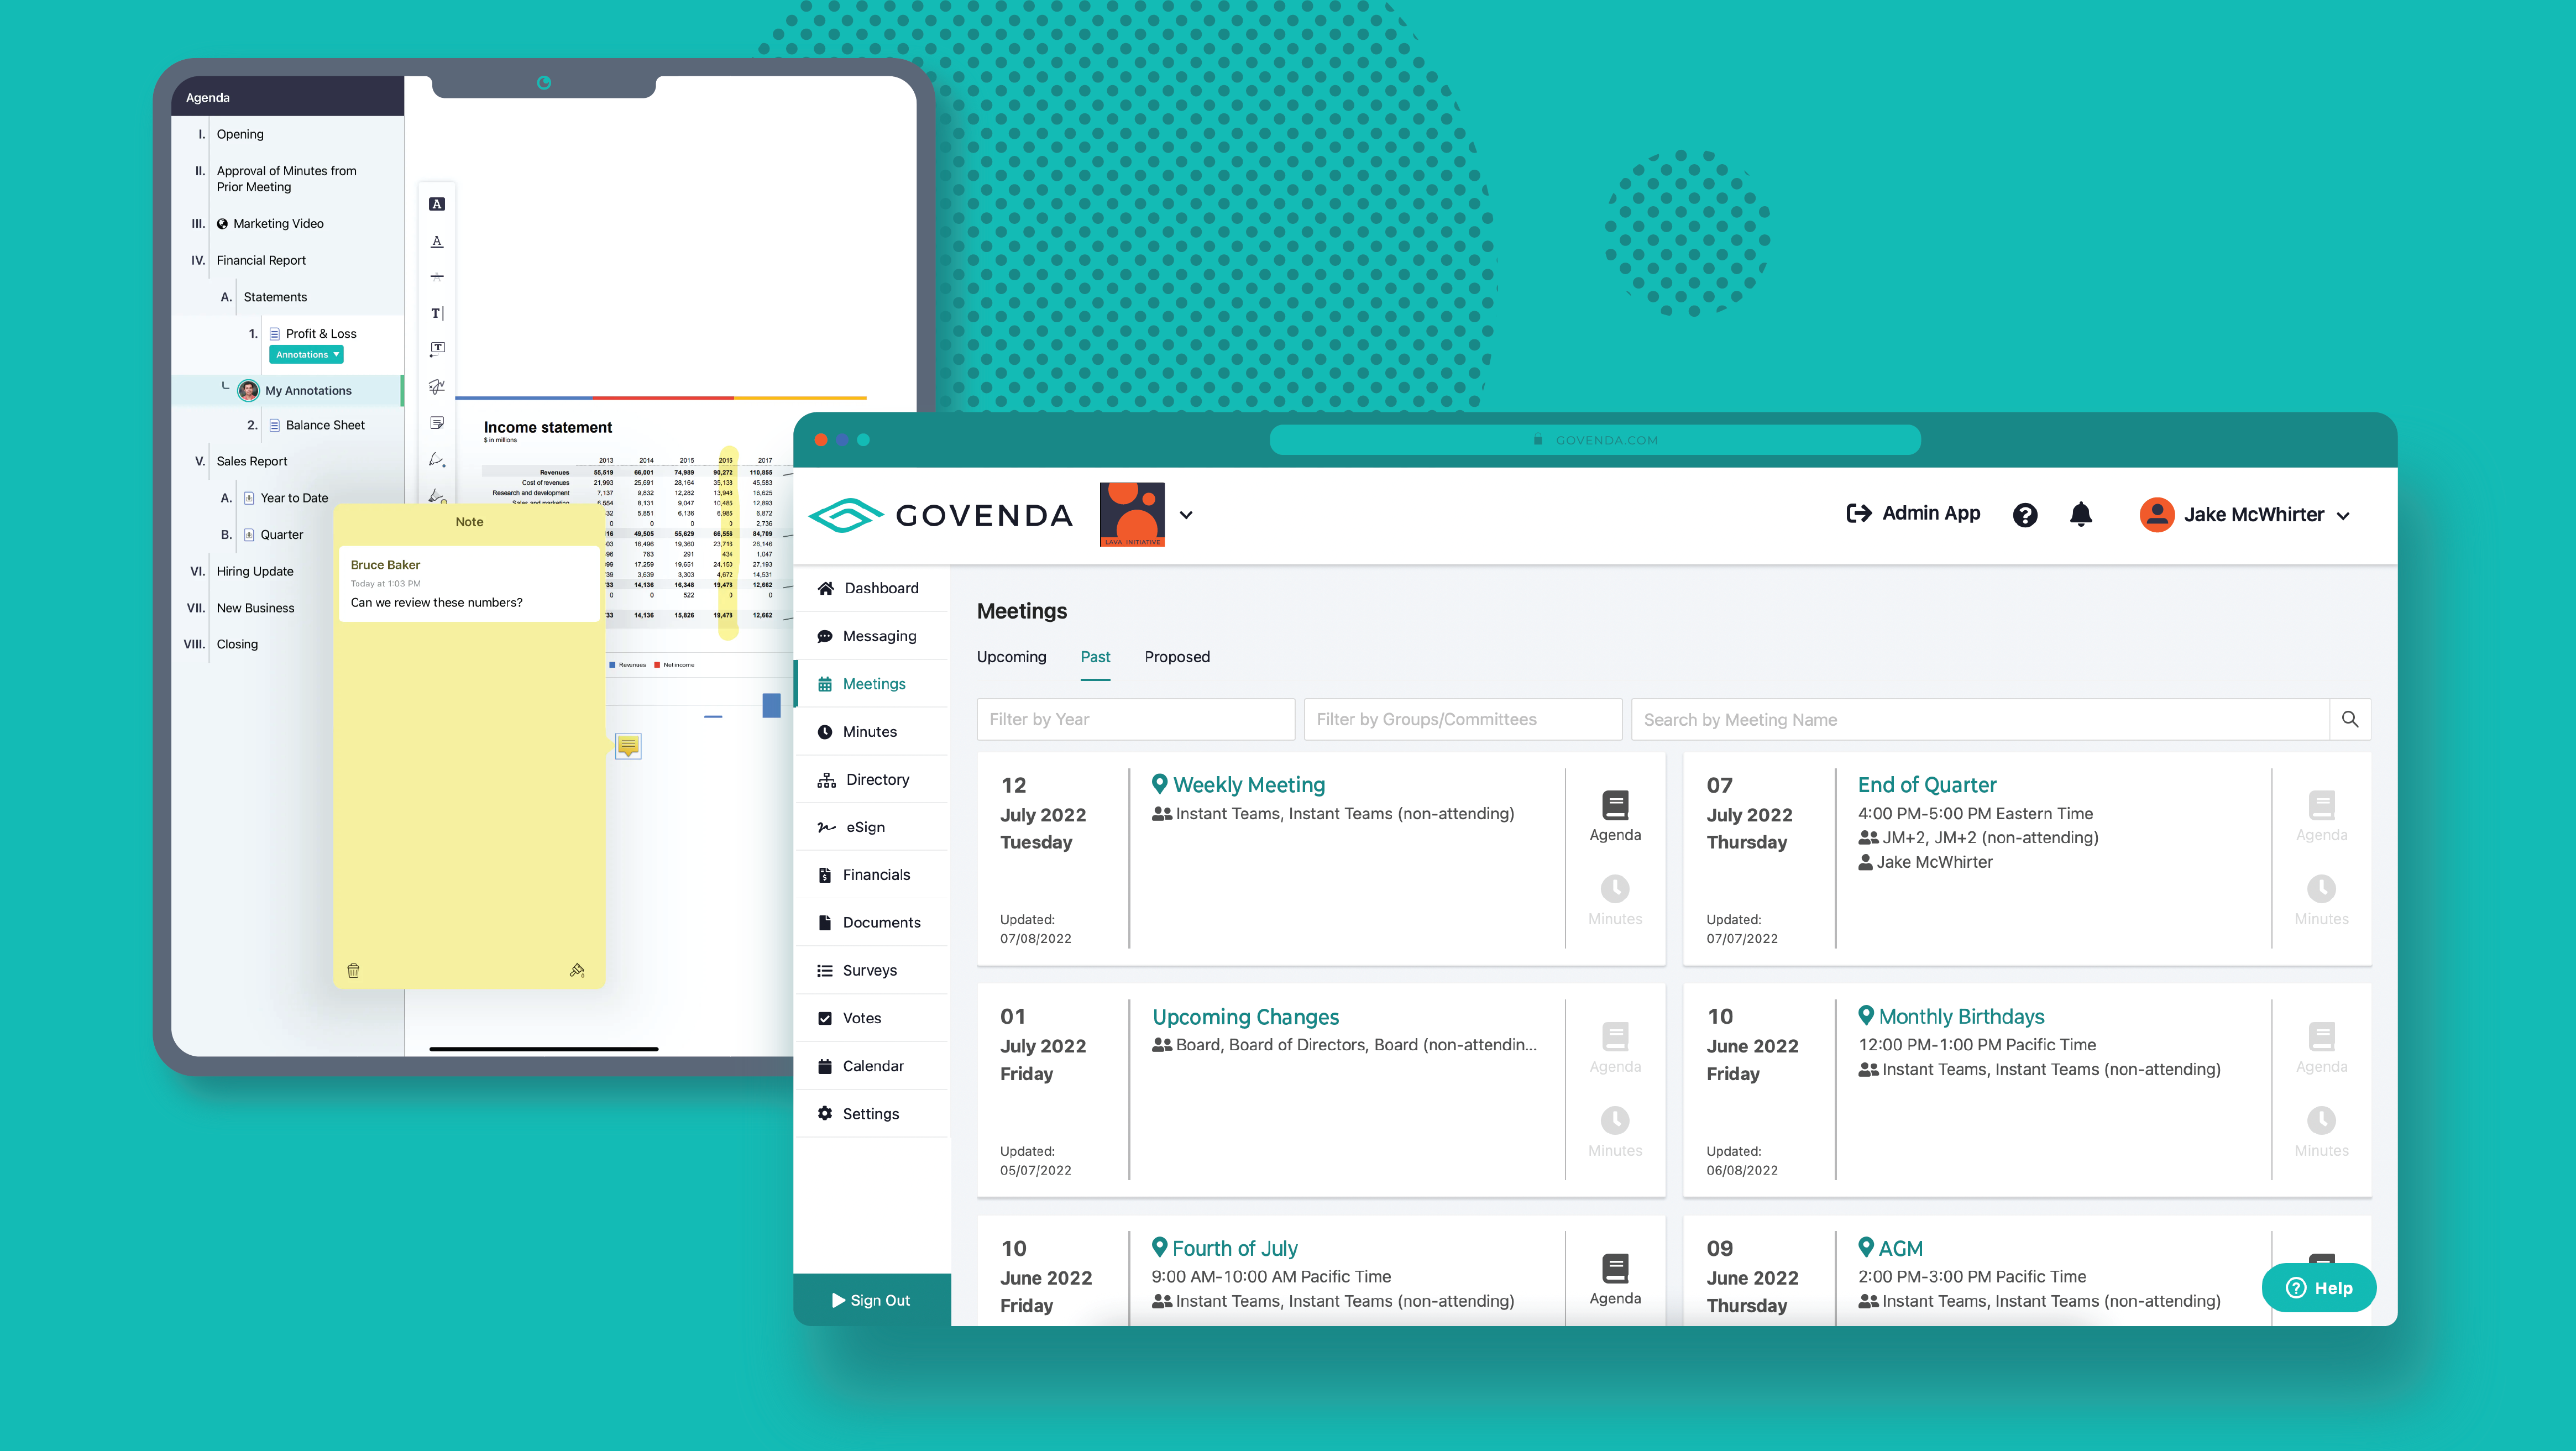 Manage Your Board Activities From Anywhere & Work Seamlessly Across All Devices.